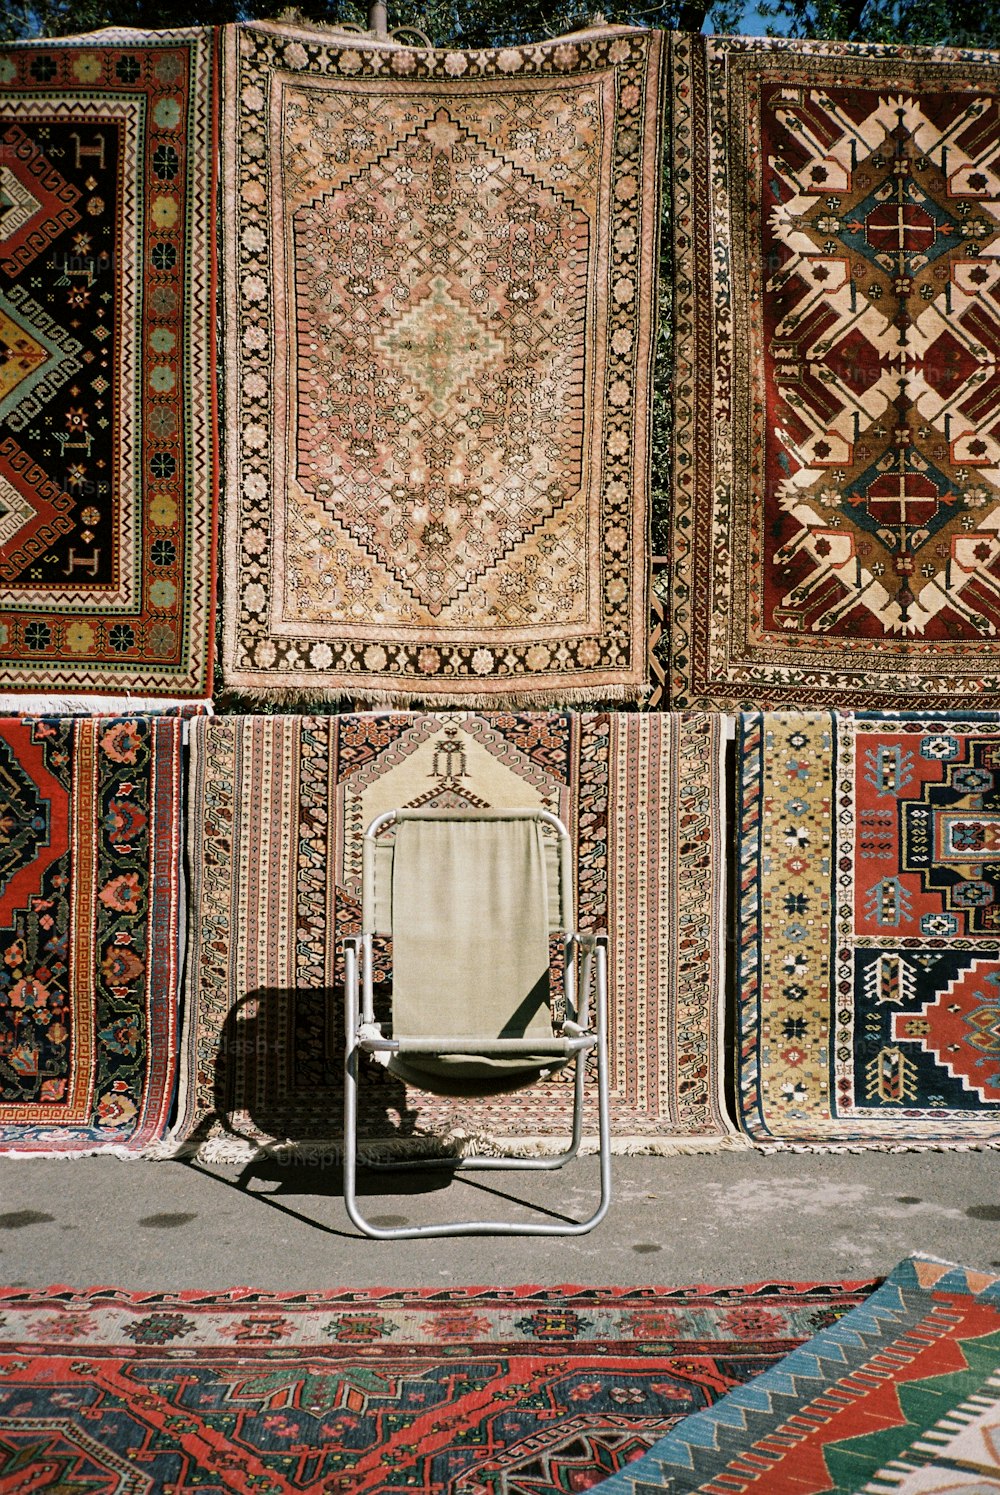 a chair sitting in front of a pile of rugs